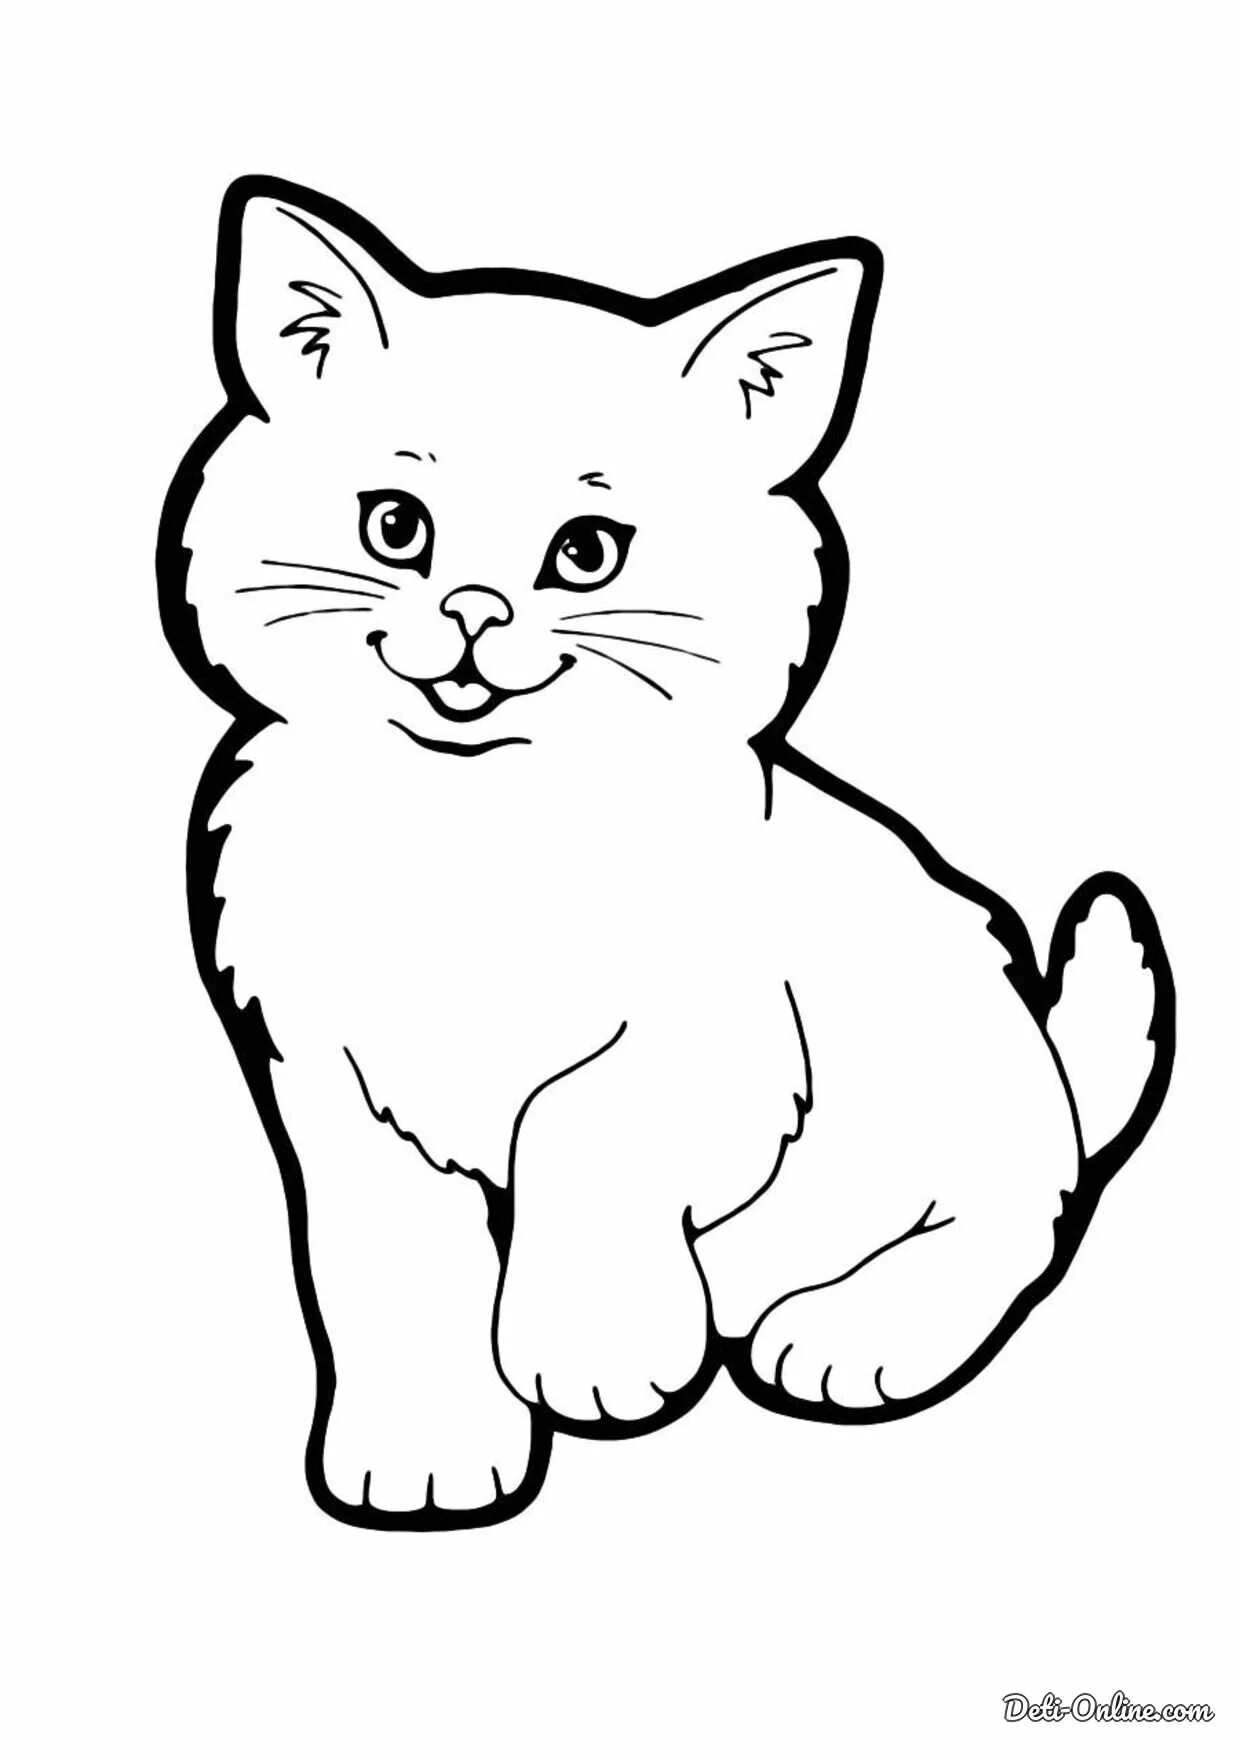 Unique drawing of a kitten